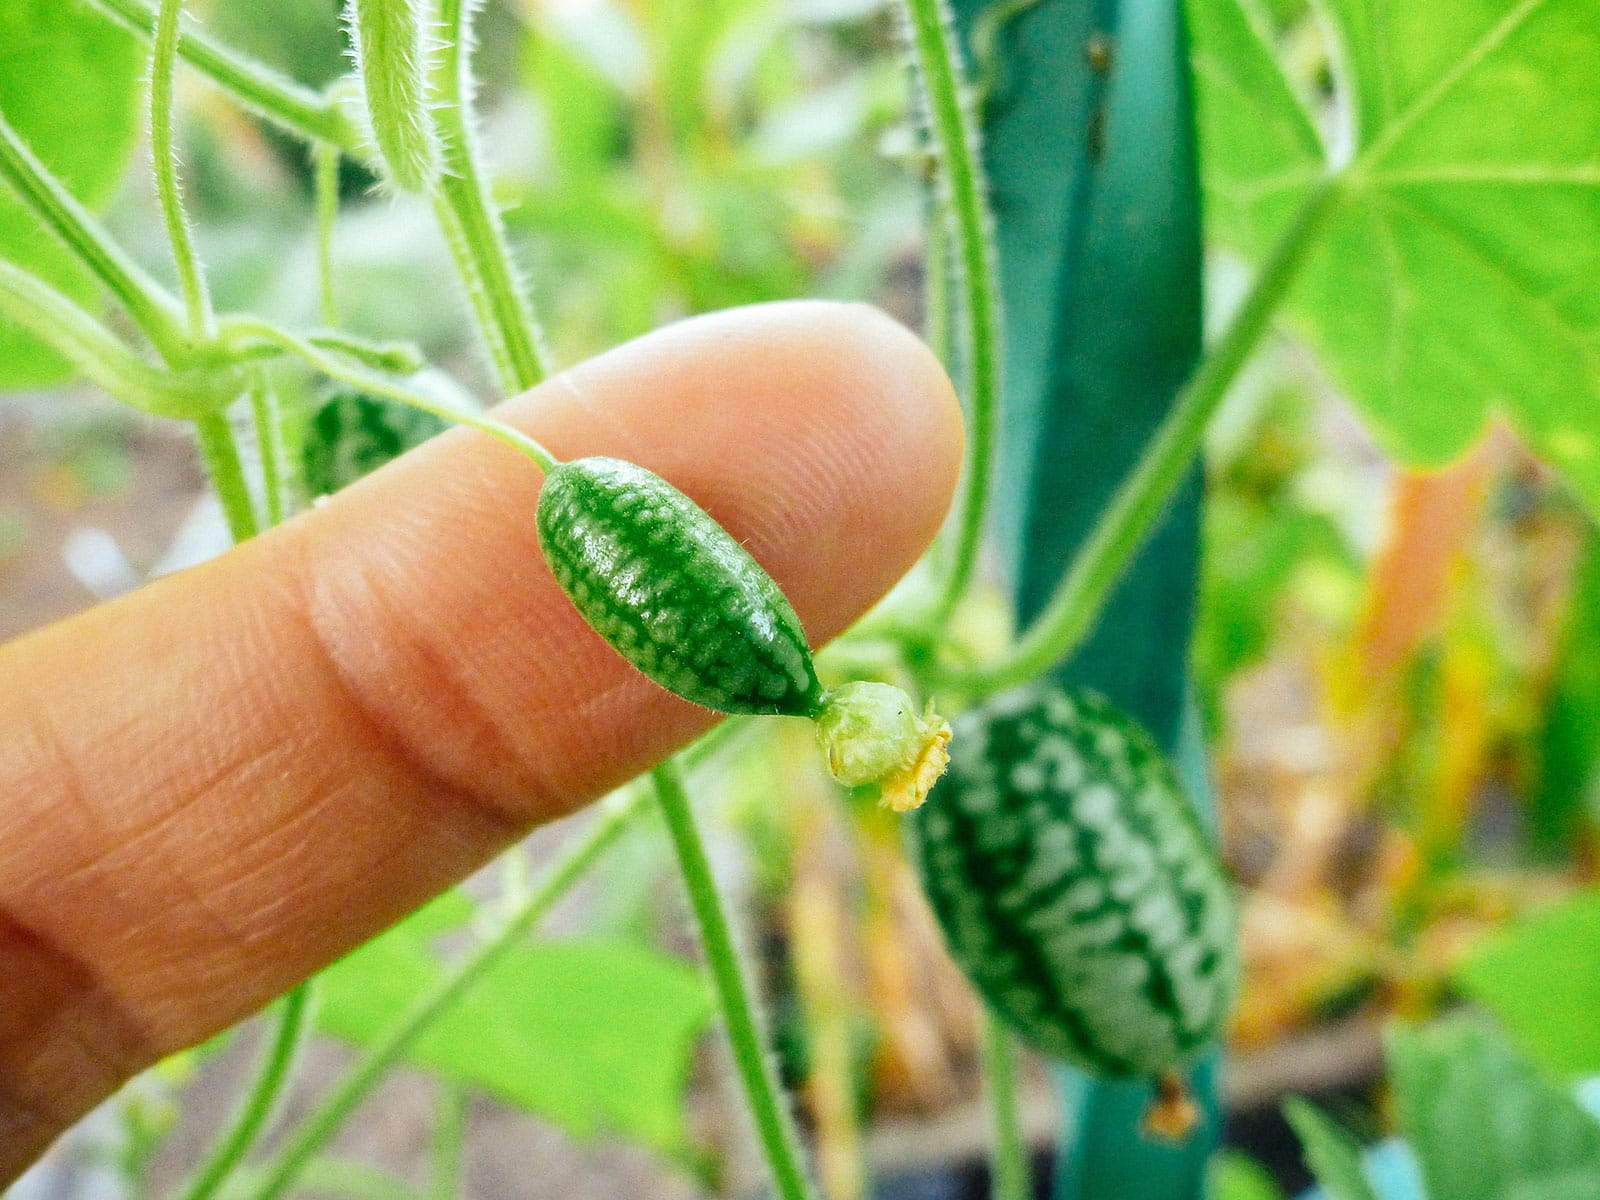 Finger placed behind a cucamelon (Mexican sour gherkin) just days away from maturing on the vine